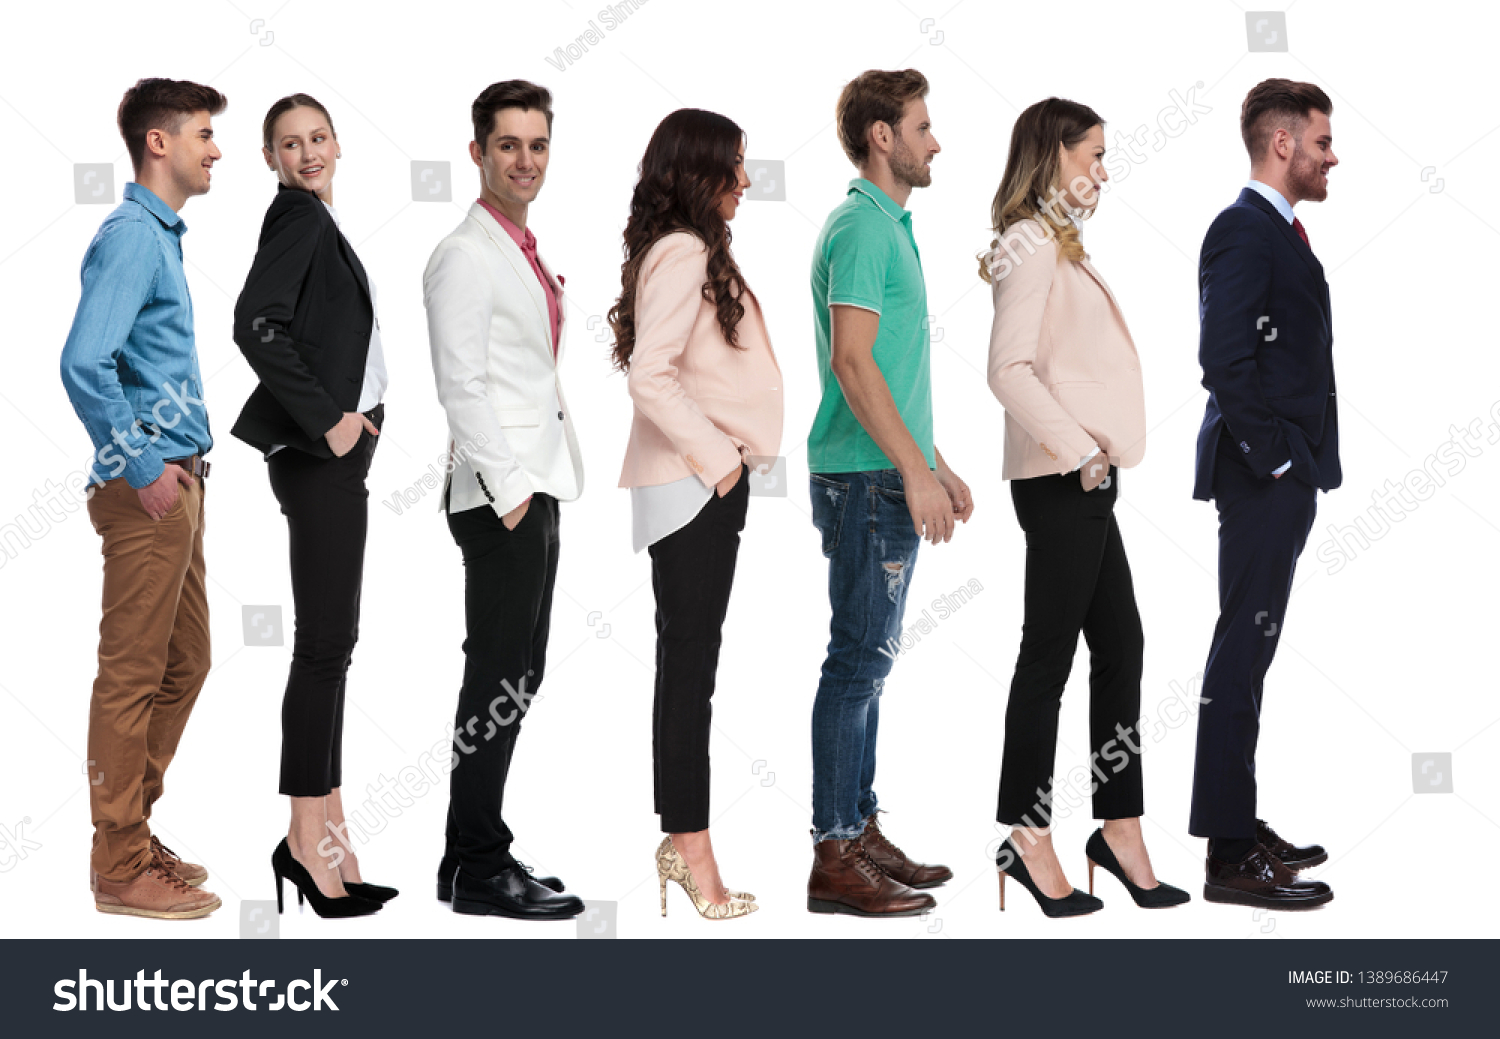 smart casual people waiting in line on white background #1389686447